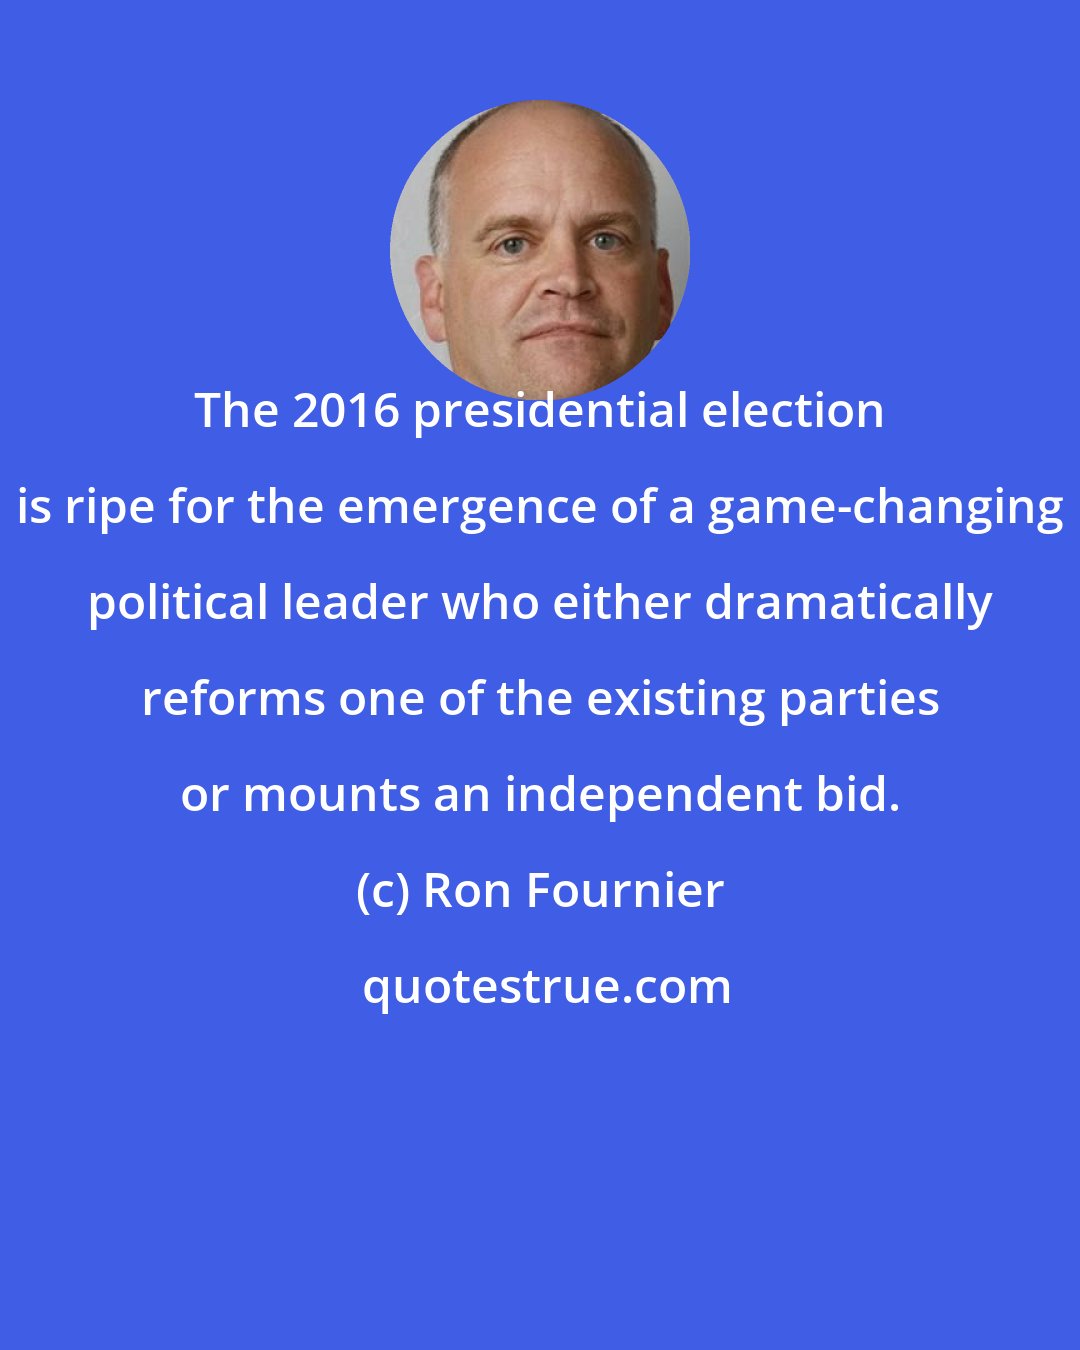 Ron Fournier: The 2016 presidential election is ripe for the emergence of a game-changing political leader who either dramatically reforms one of the existing parties or mounts an independent bid.